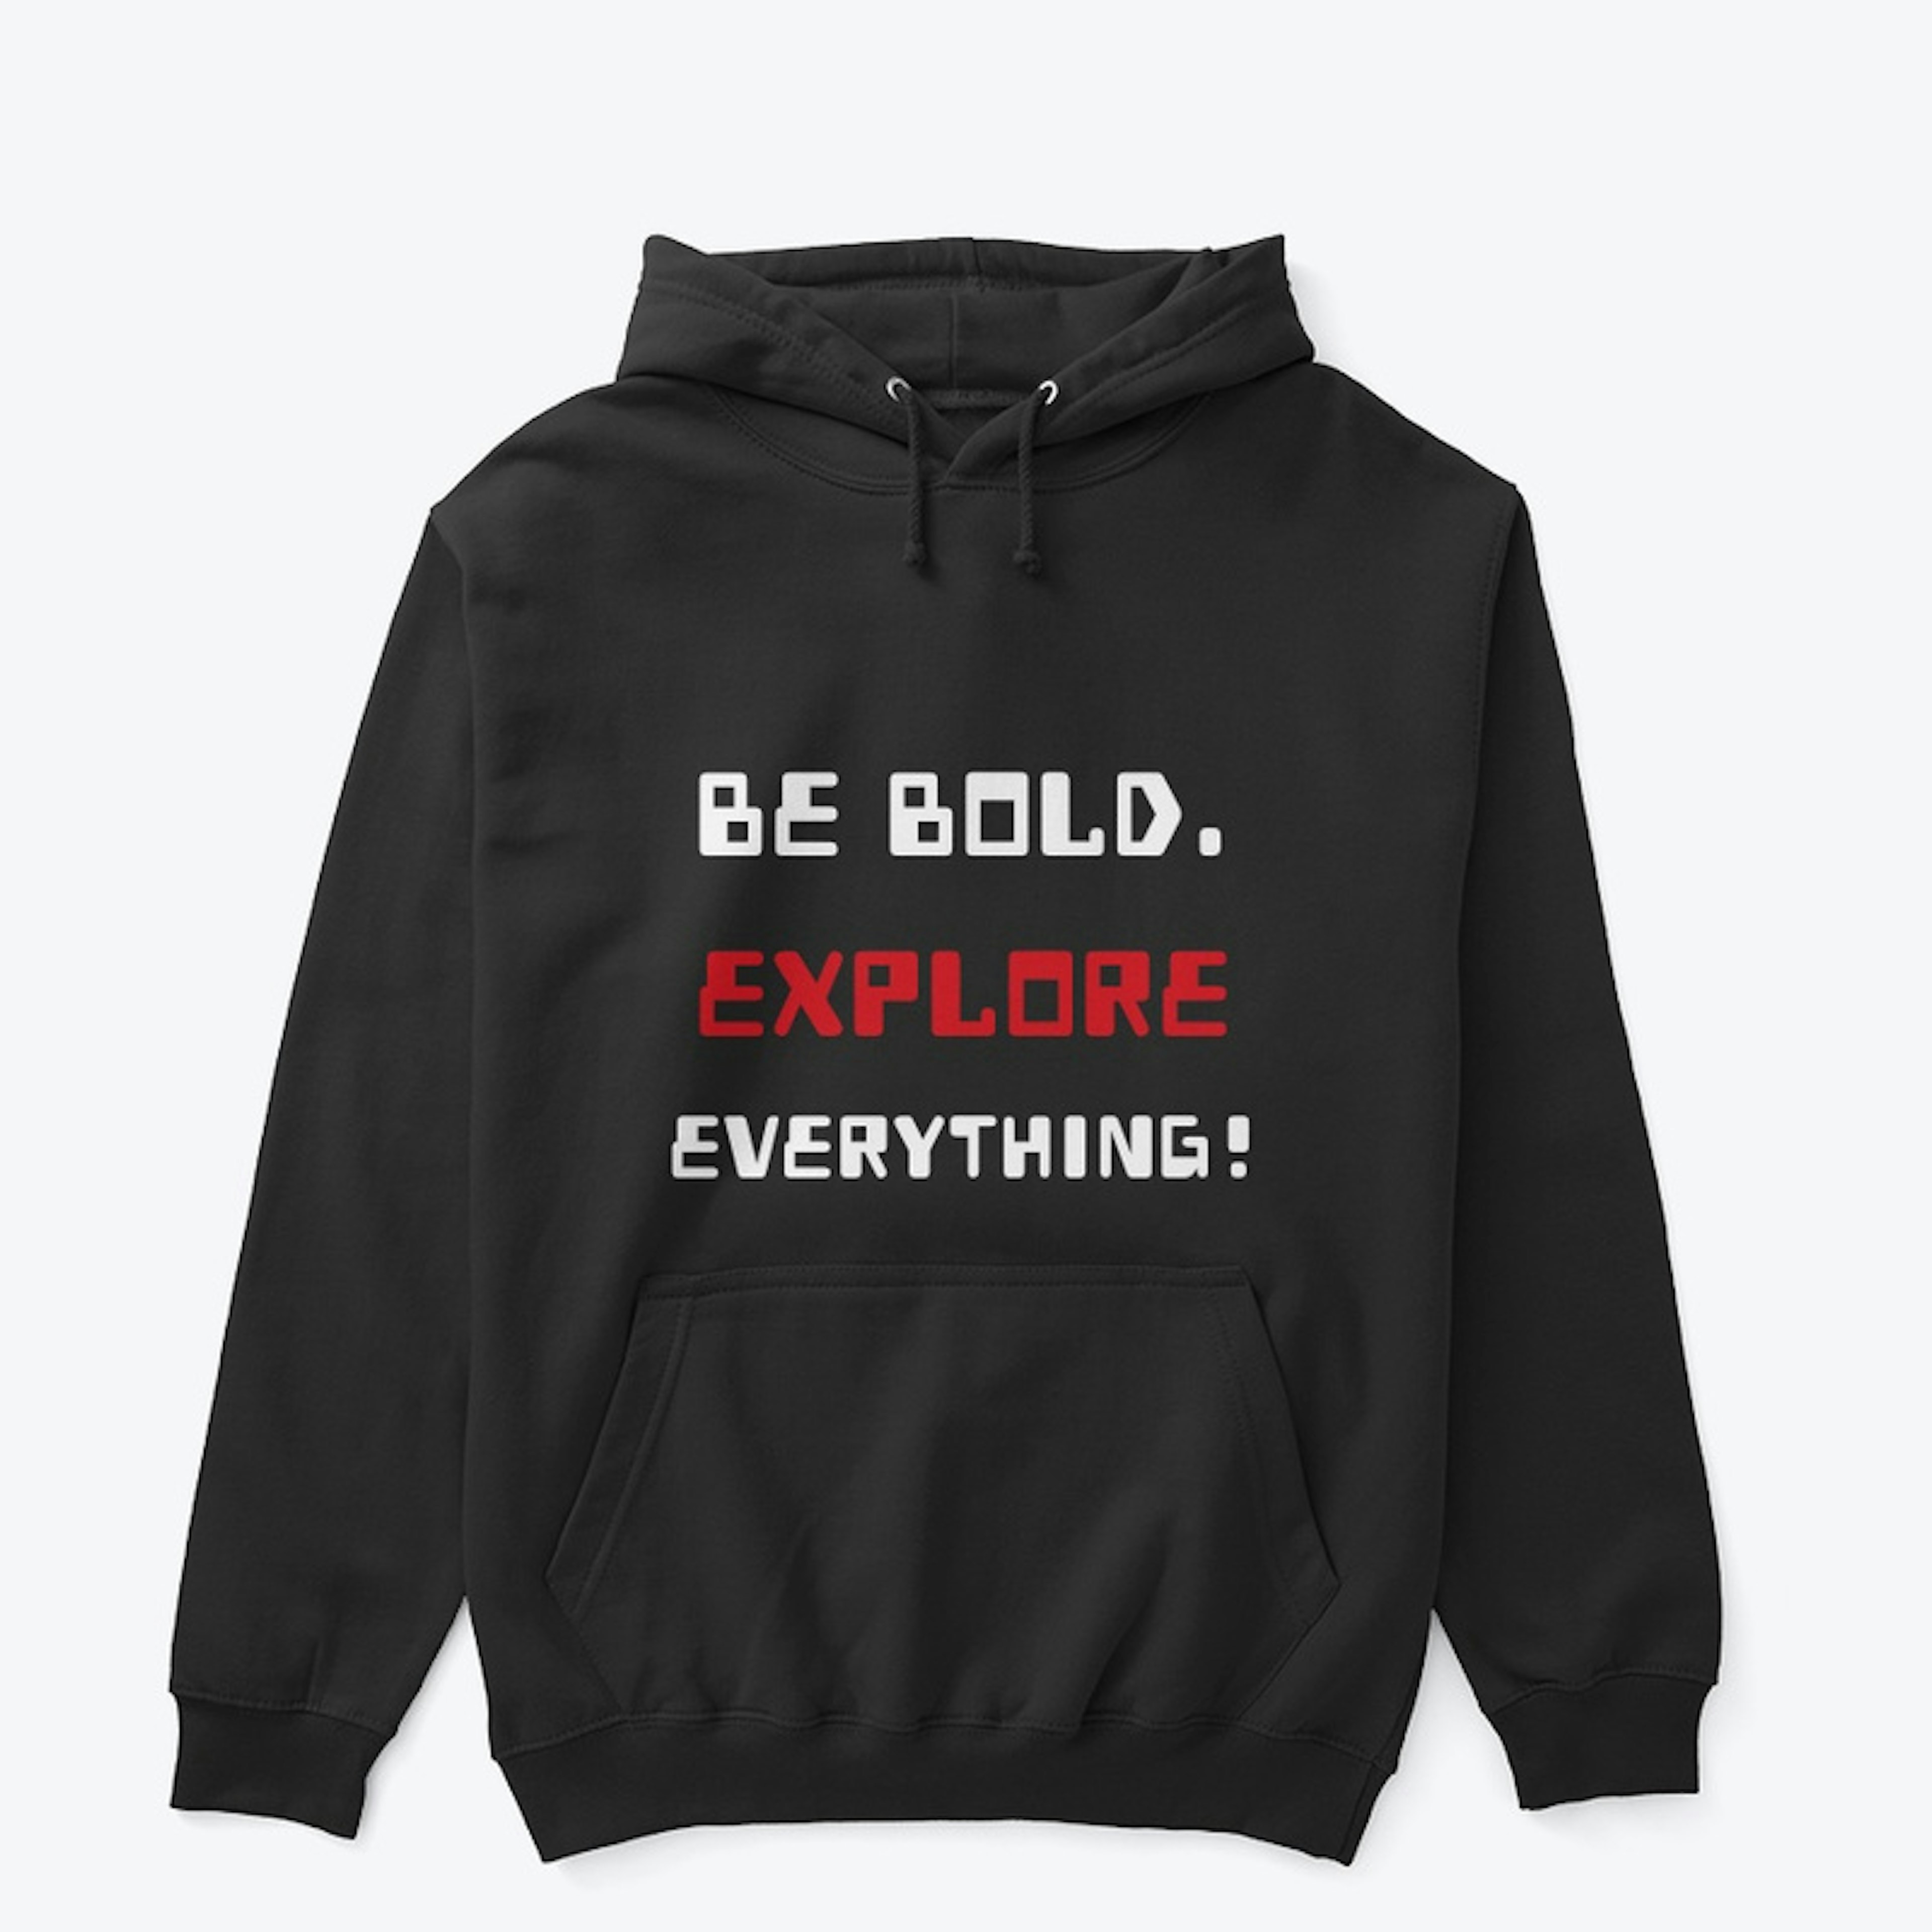 BE BOLD. EXPLORE EVERYTHING!